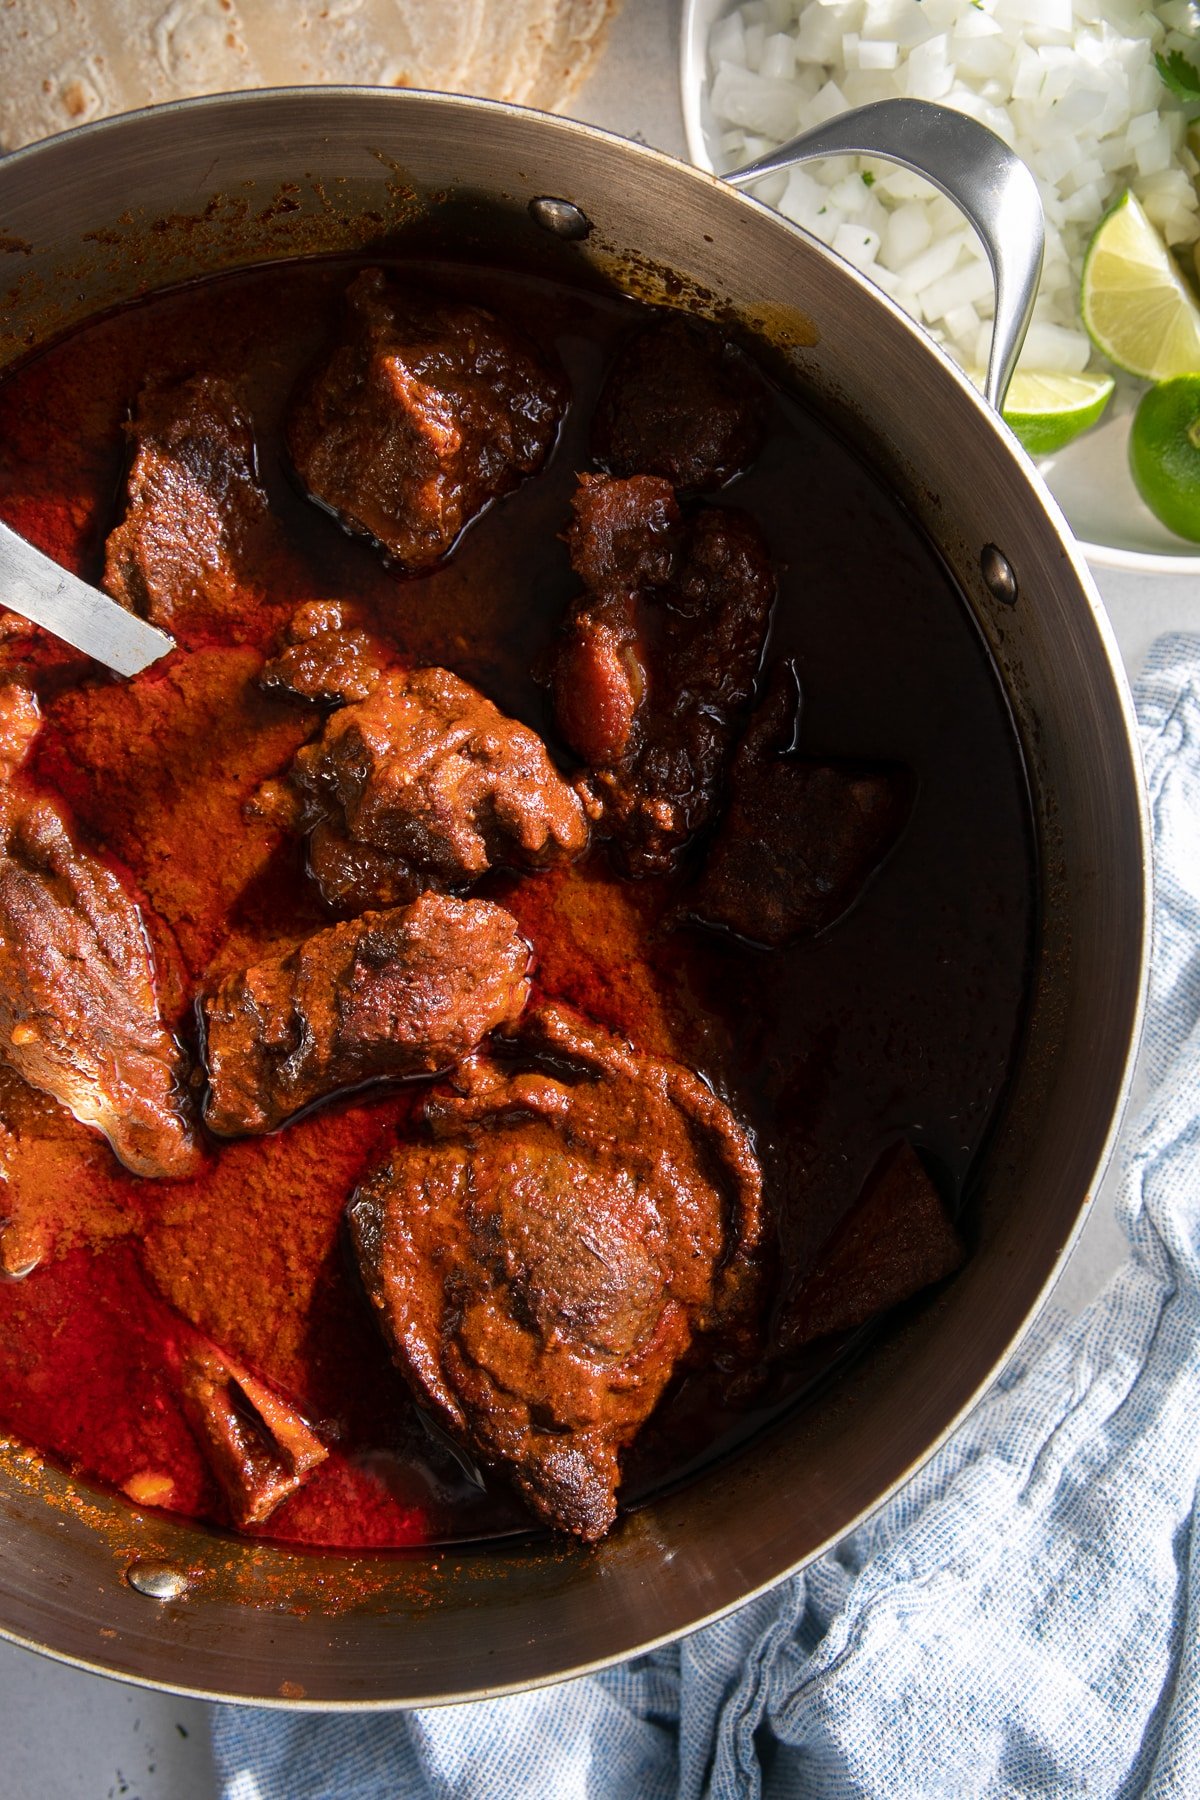 Large pot filled with Mexican birria made with beef and lamb.